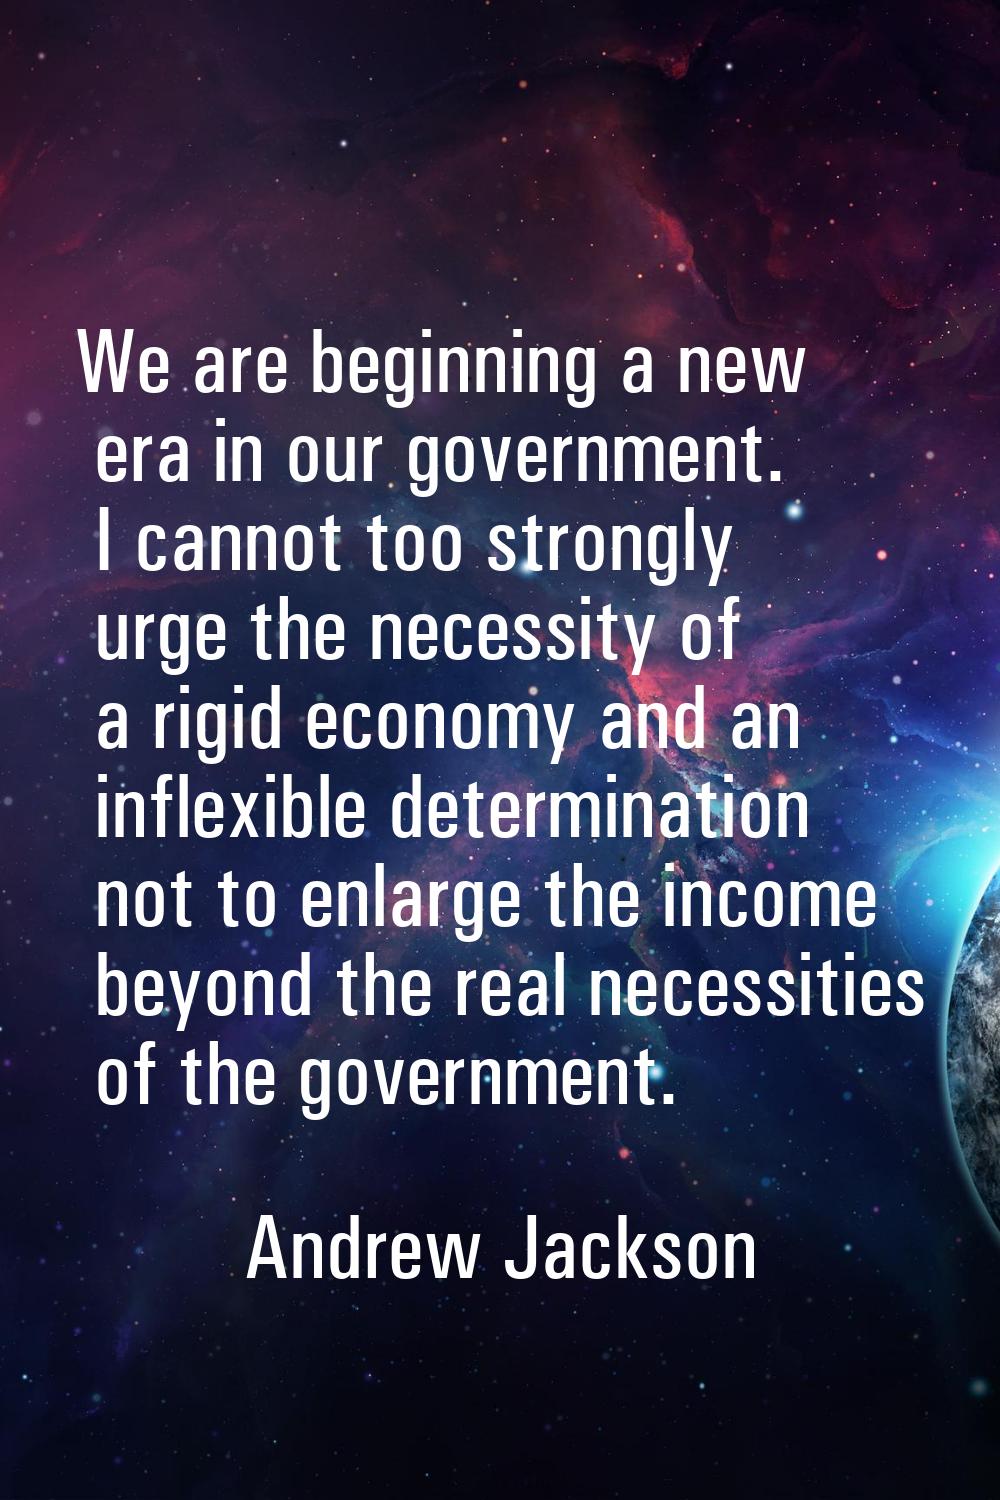 We are beginning a new era in our government. I cannot too strongly urge the necessity of a rigid e